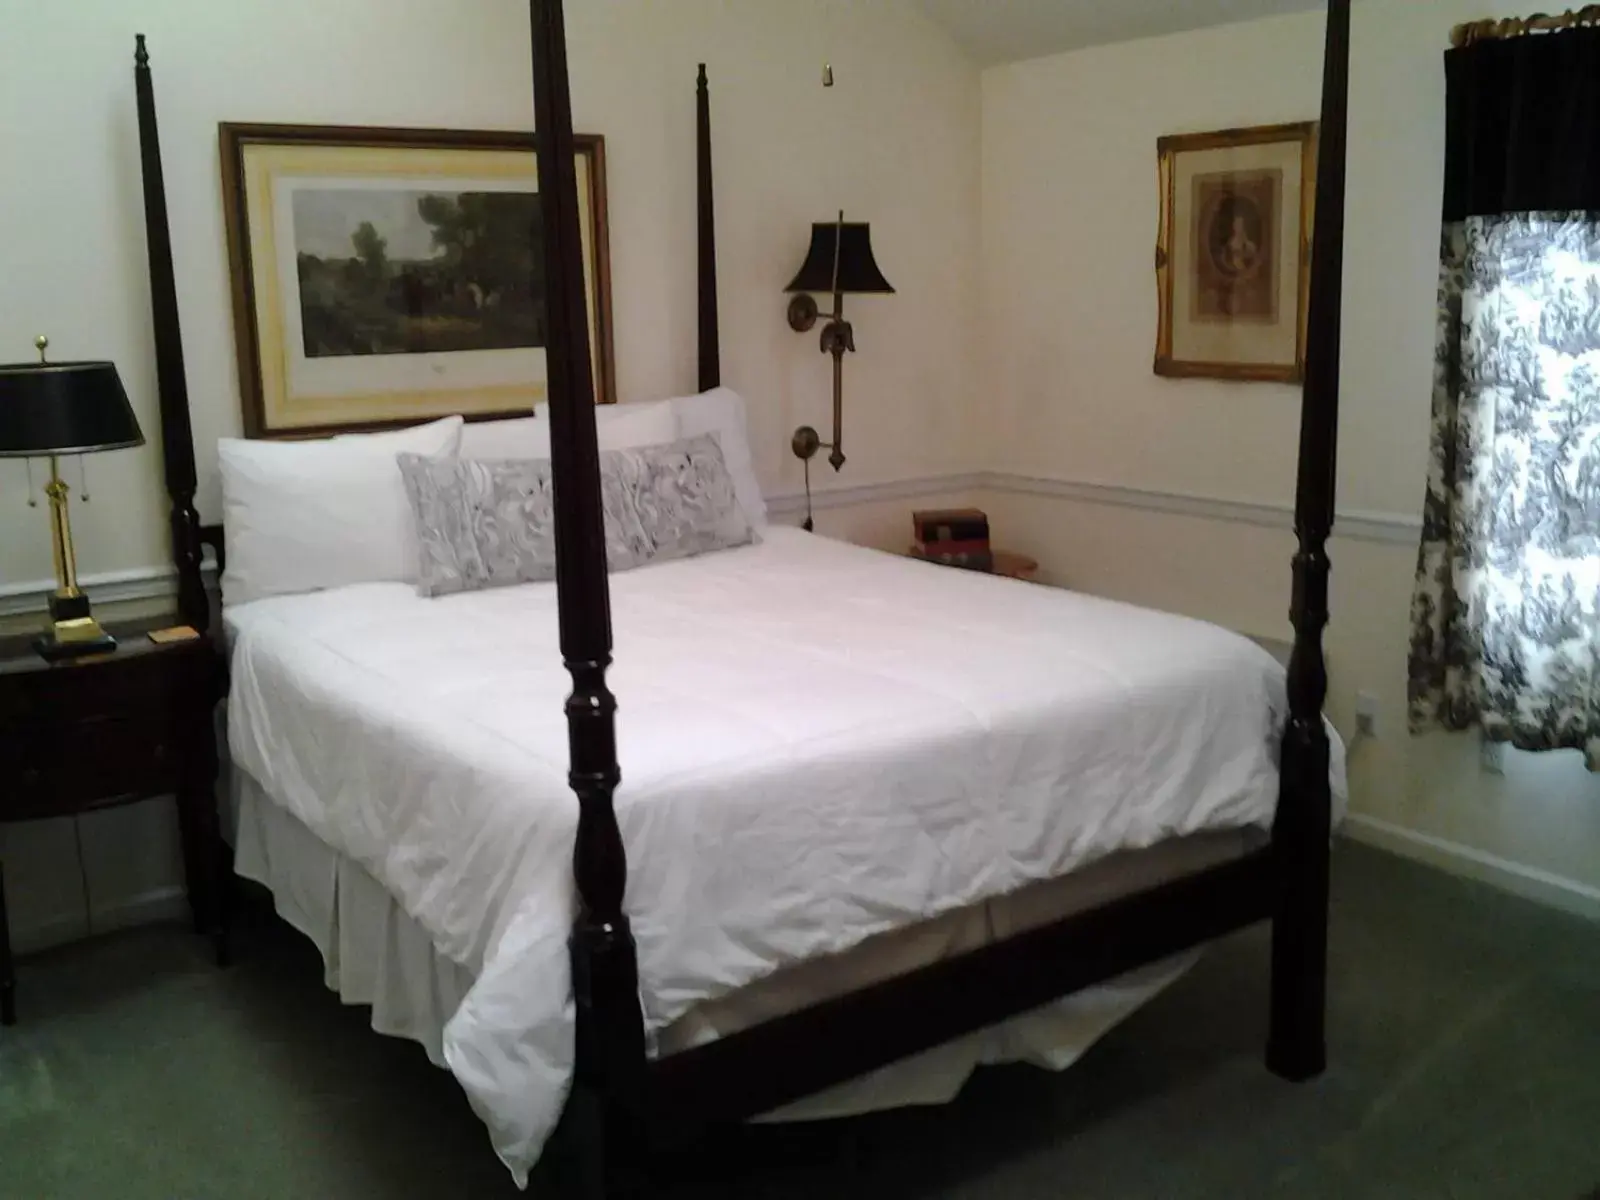 Bed, Room Photo in The Inn at Benicia Bay